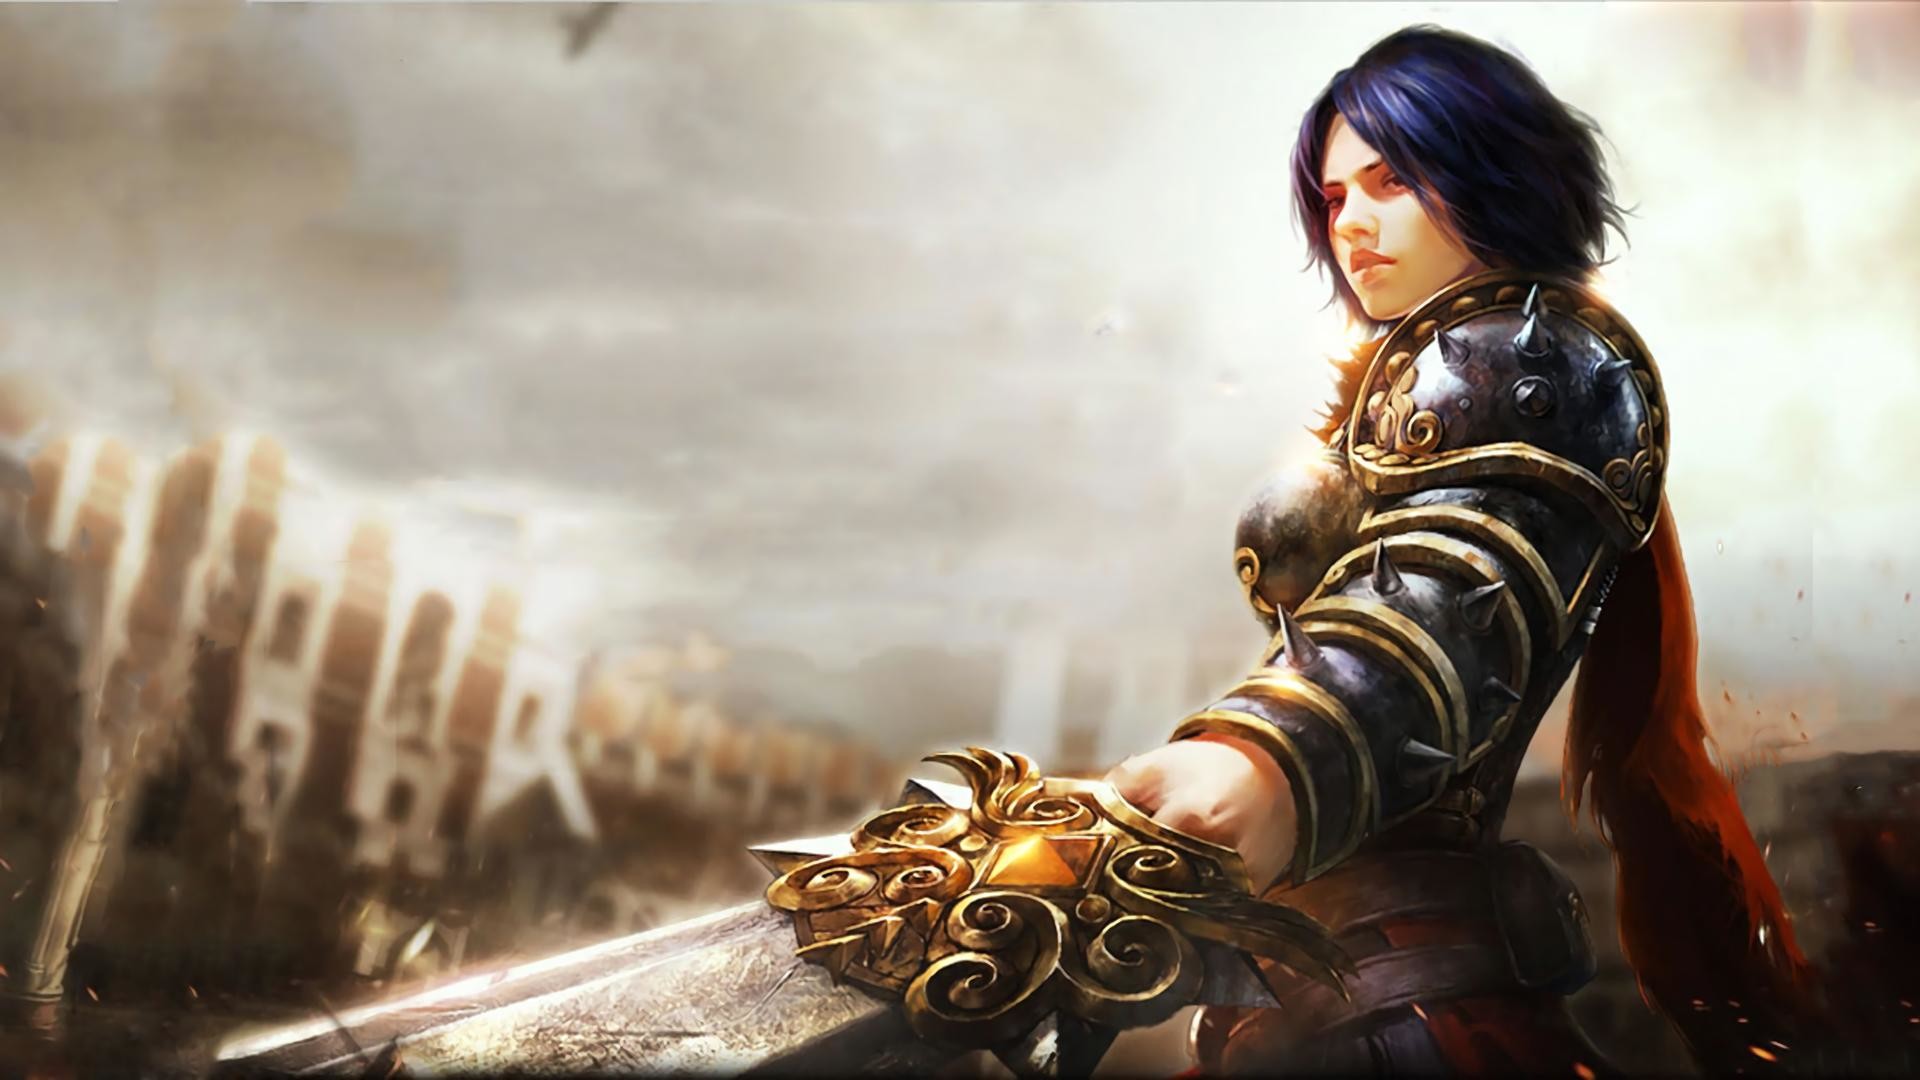 1920x1080 MEDIAI made a Bellona wallpaper from one of the Chinese adds for smite and  thought some people might like it.